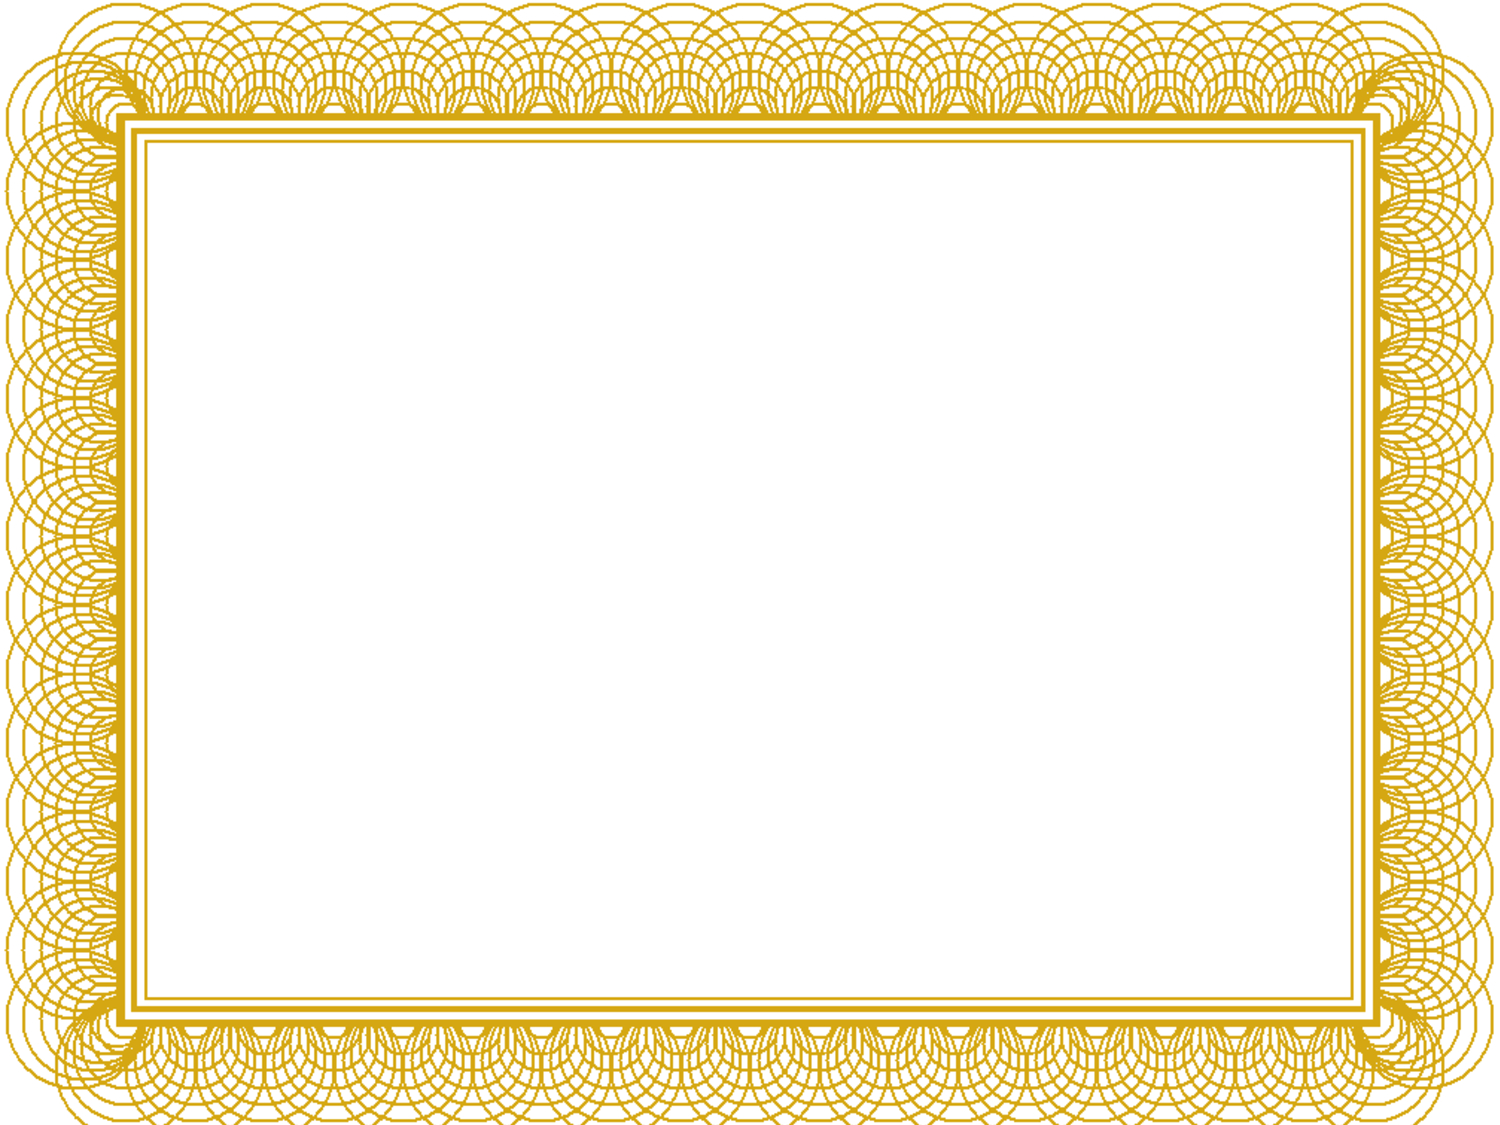 Printable Certificate Borders - Calep.midnightpig.co Within Award Certificate Border Template